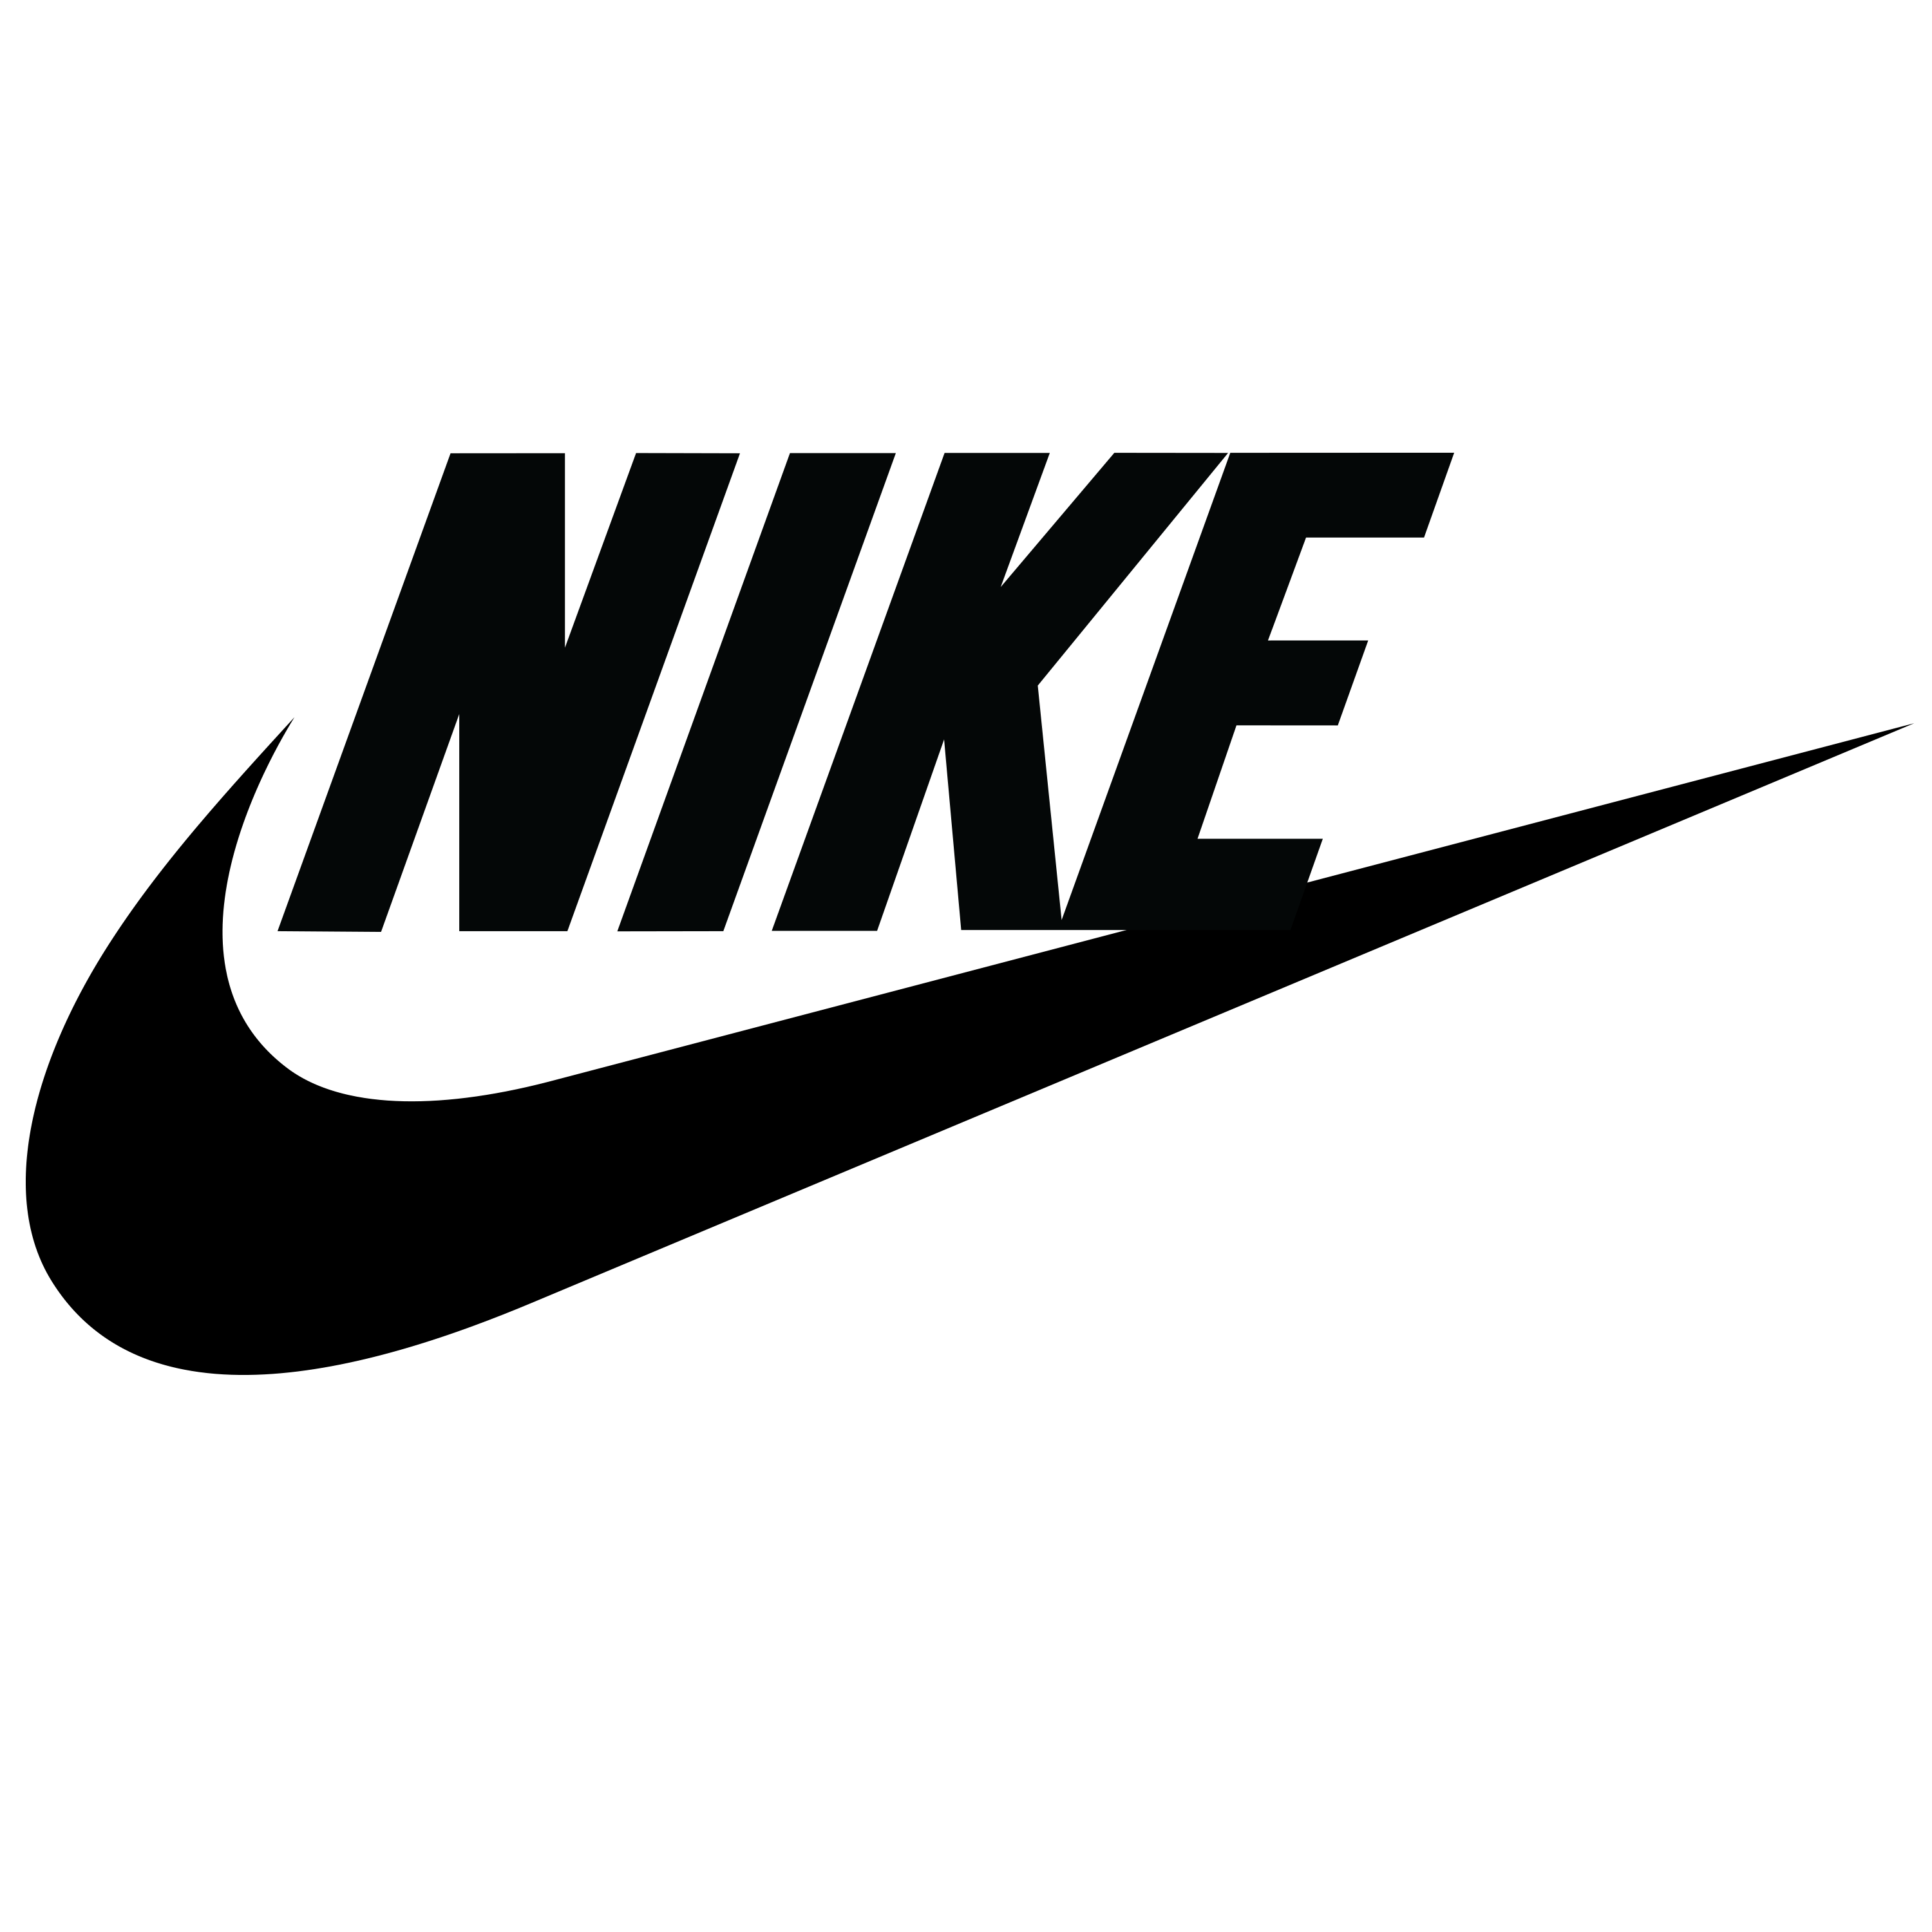 Up to 30% Off Select Styles @ Nike Store